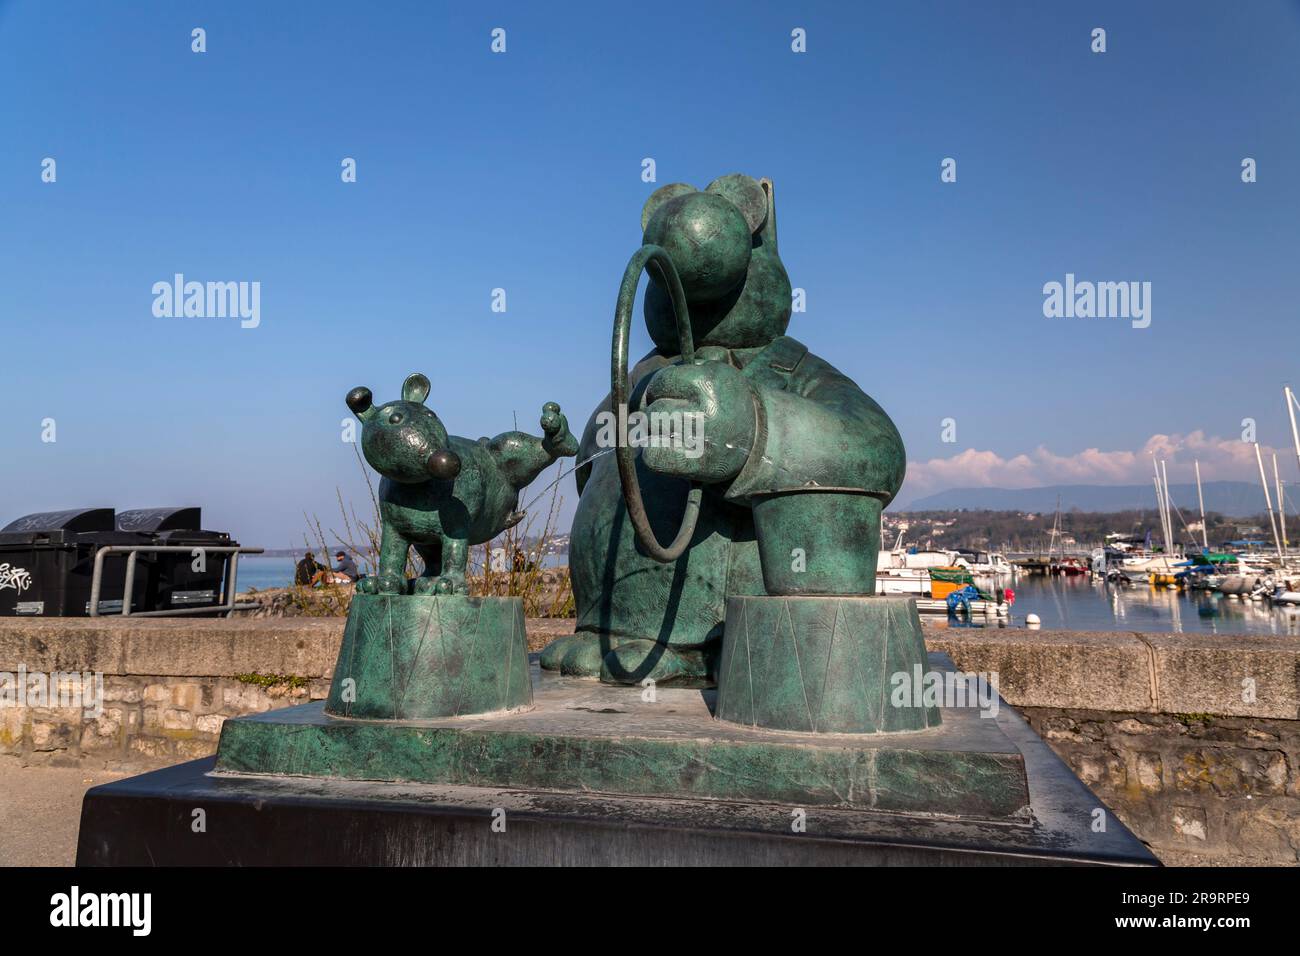 Geneva, Switzerland - 25 March 2022: Exhibition of sculptures Le Chat, created by the Belgian cartoon artist Philippe Geluck, along the Leman lakeside Stock Photo